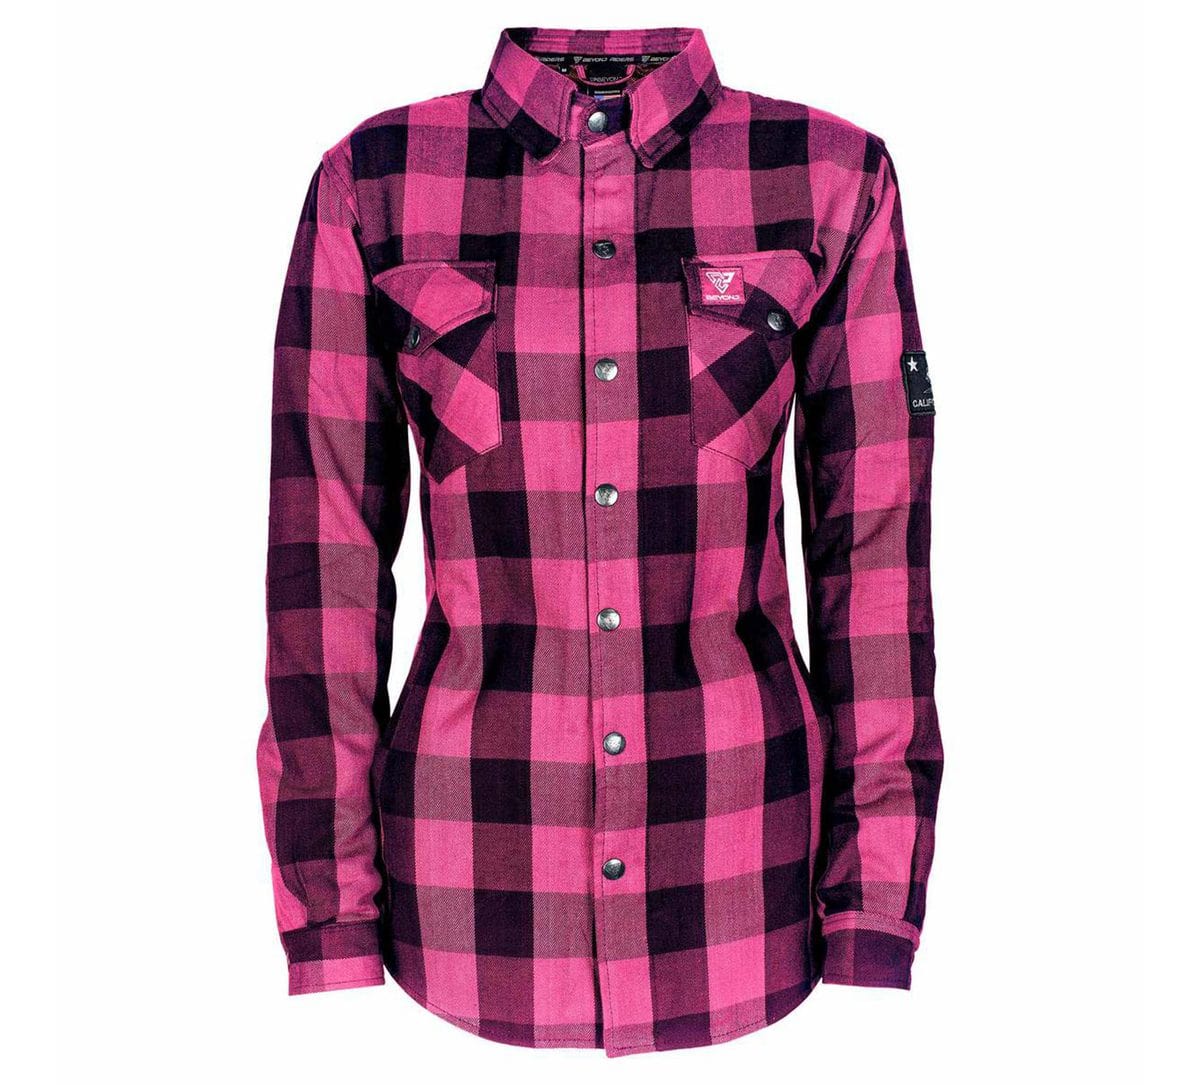 Protective Flannel Shirt with Pads for Women - Pink Checkered